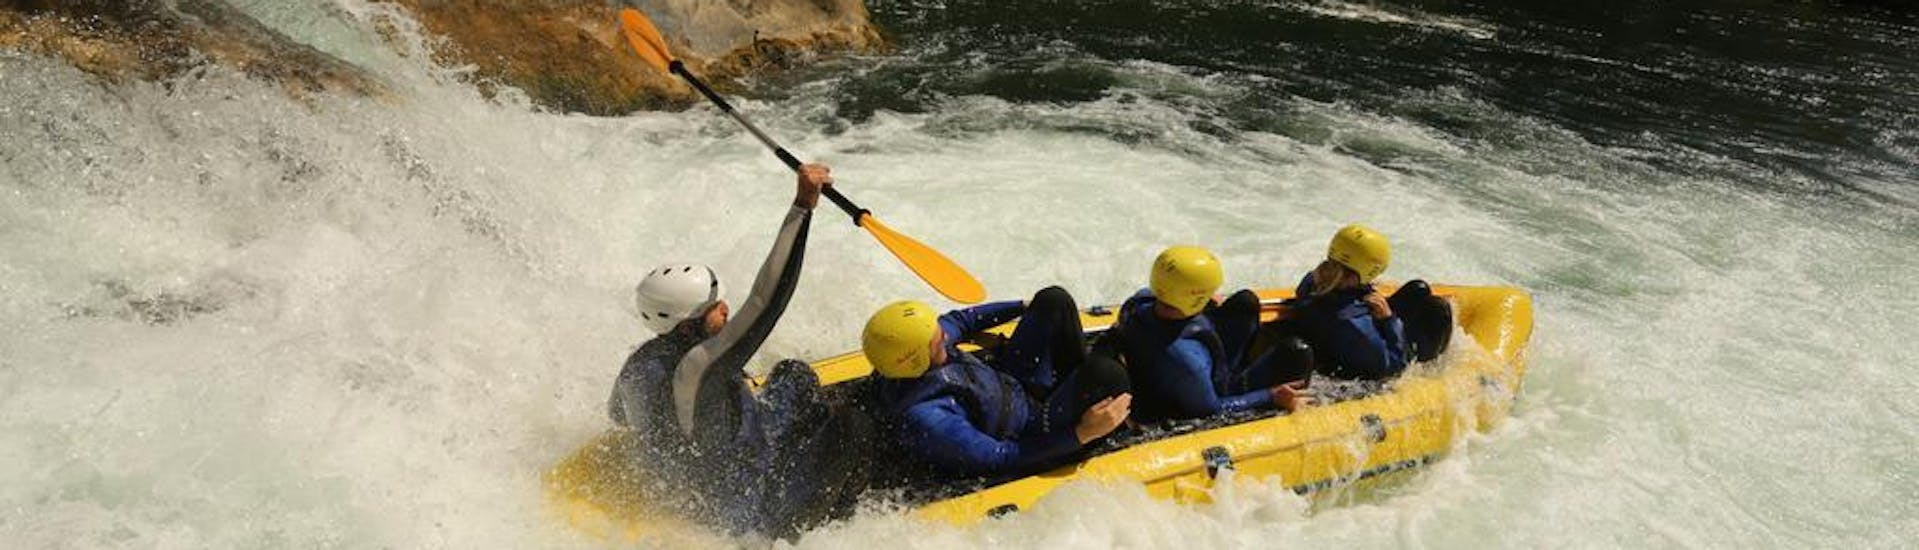 Friends and a guide sit in the raft and go down a fast rapid on the river during rafting on the Iller for stag parties (from 10 people) with MB Events & Adventures Allgäu & Bodensee.